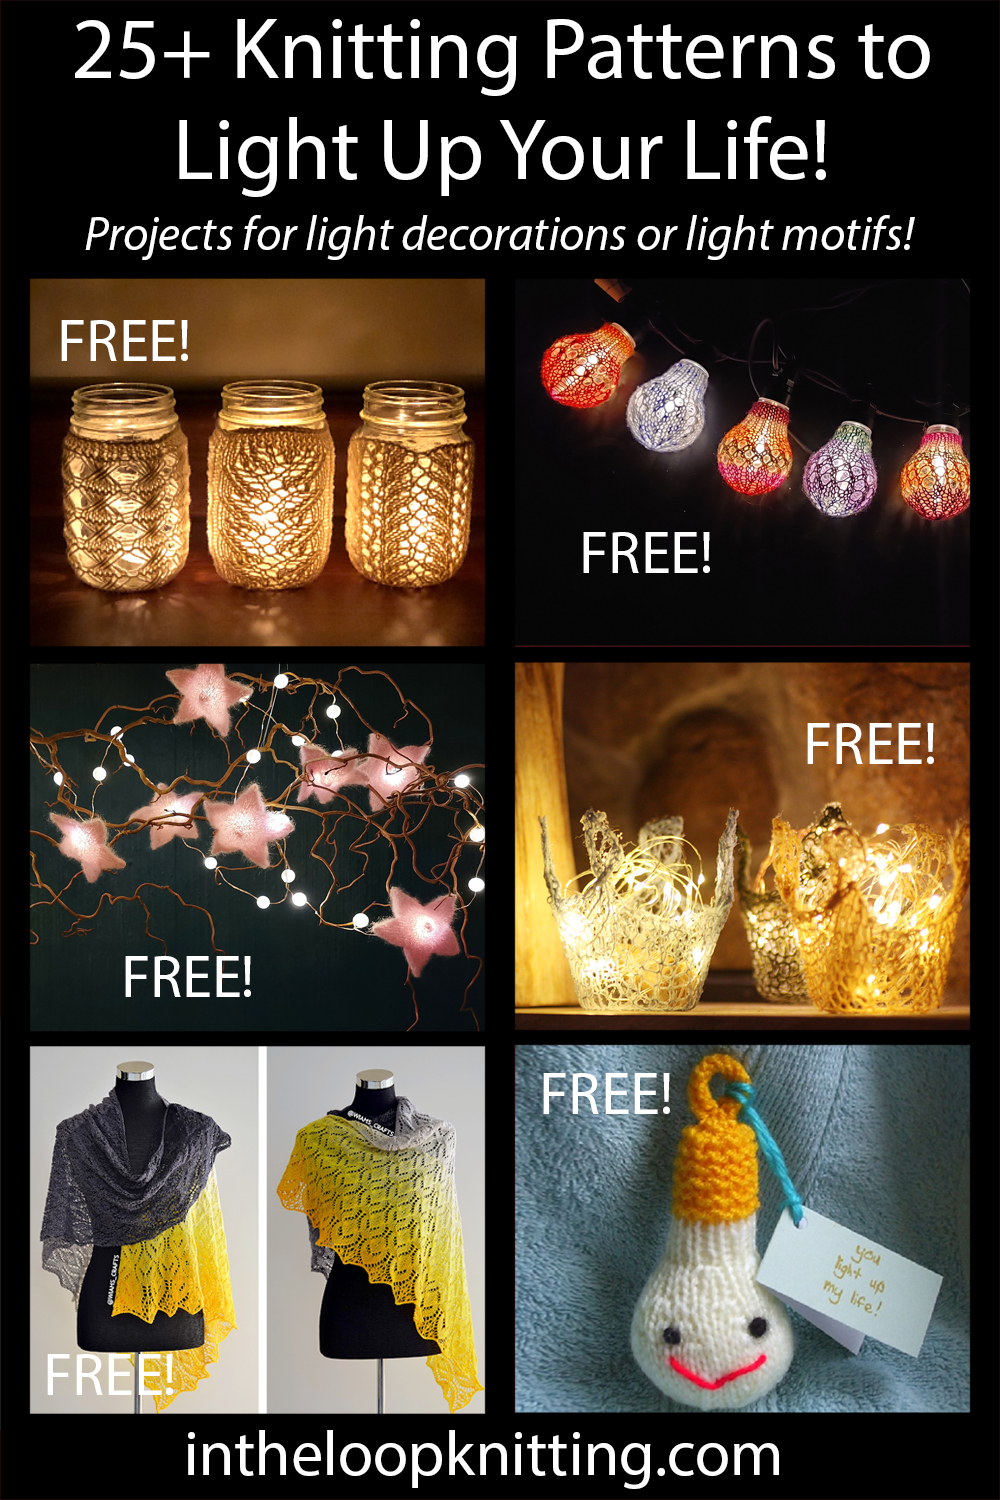 Light Knitting Patterns. Knitting projects inspired by light including candle cozies, fairy lights, flame motifs, and more.